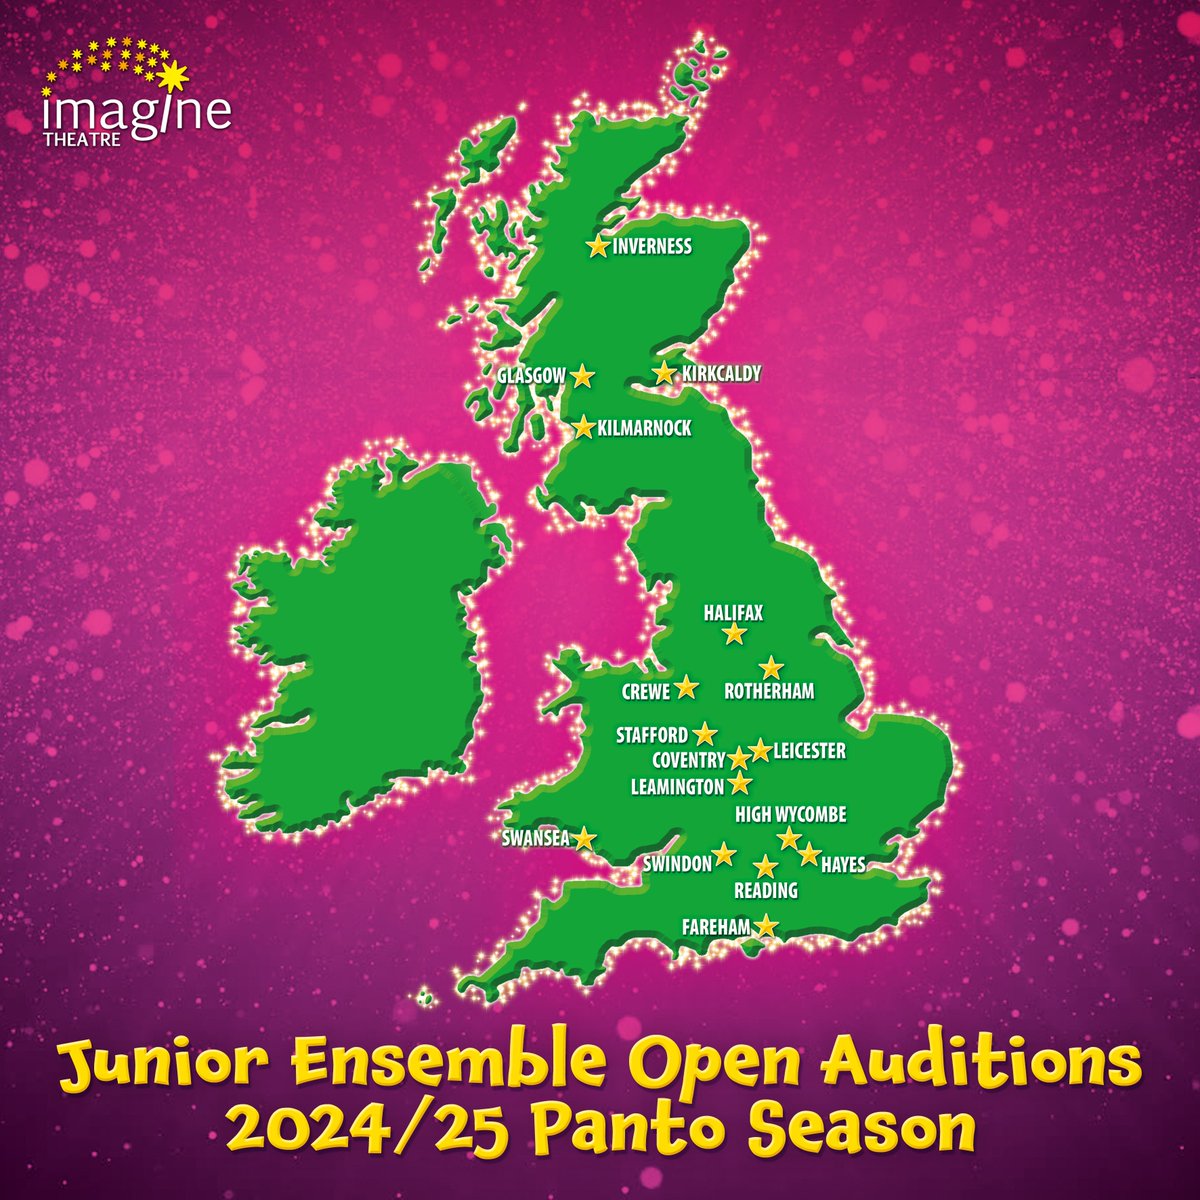 Only 4 weeks to go until this season's Junior Ensemble panto auditions begin. For more information on dates, venues and requirements please visit imaginetheatre.co.uk/childrens-audi…